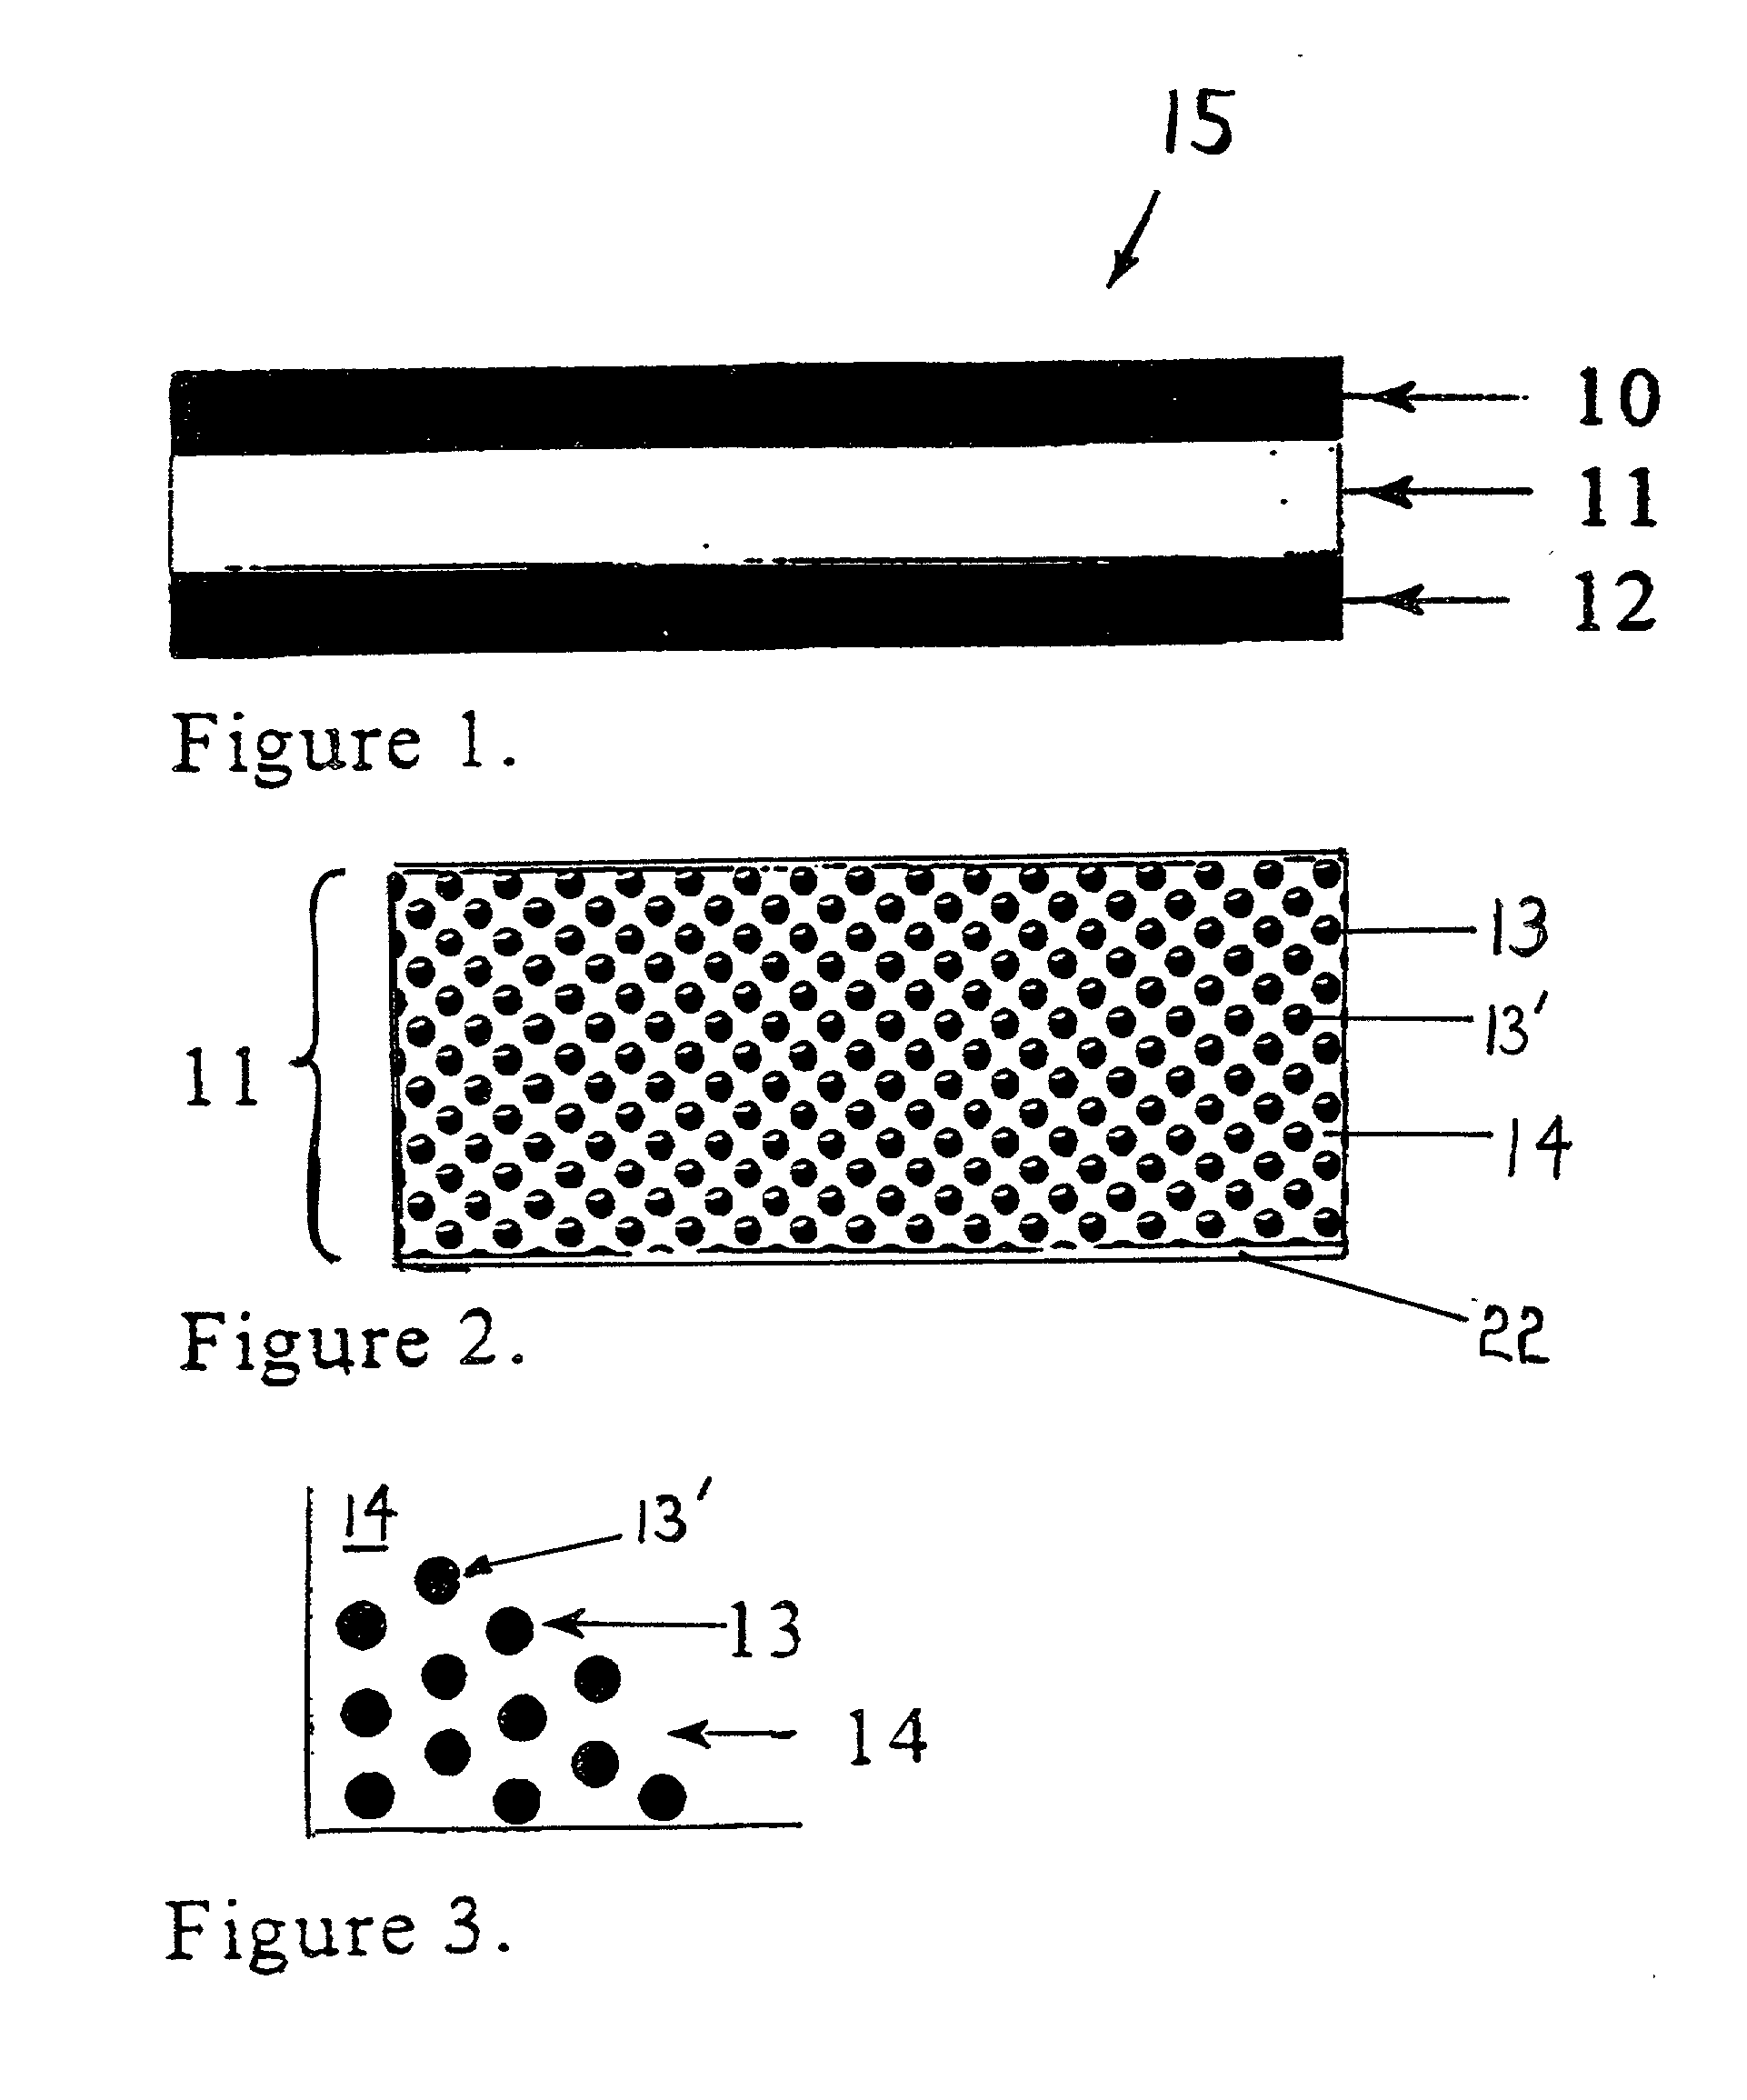 Integral capacitance for printed circuit board using dielectric nanopowders